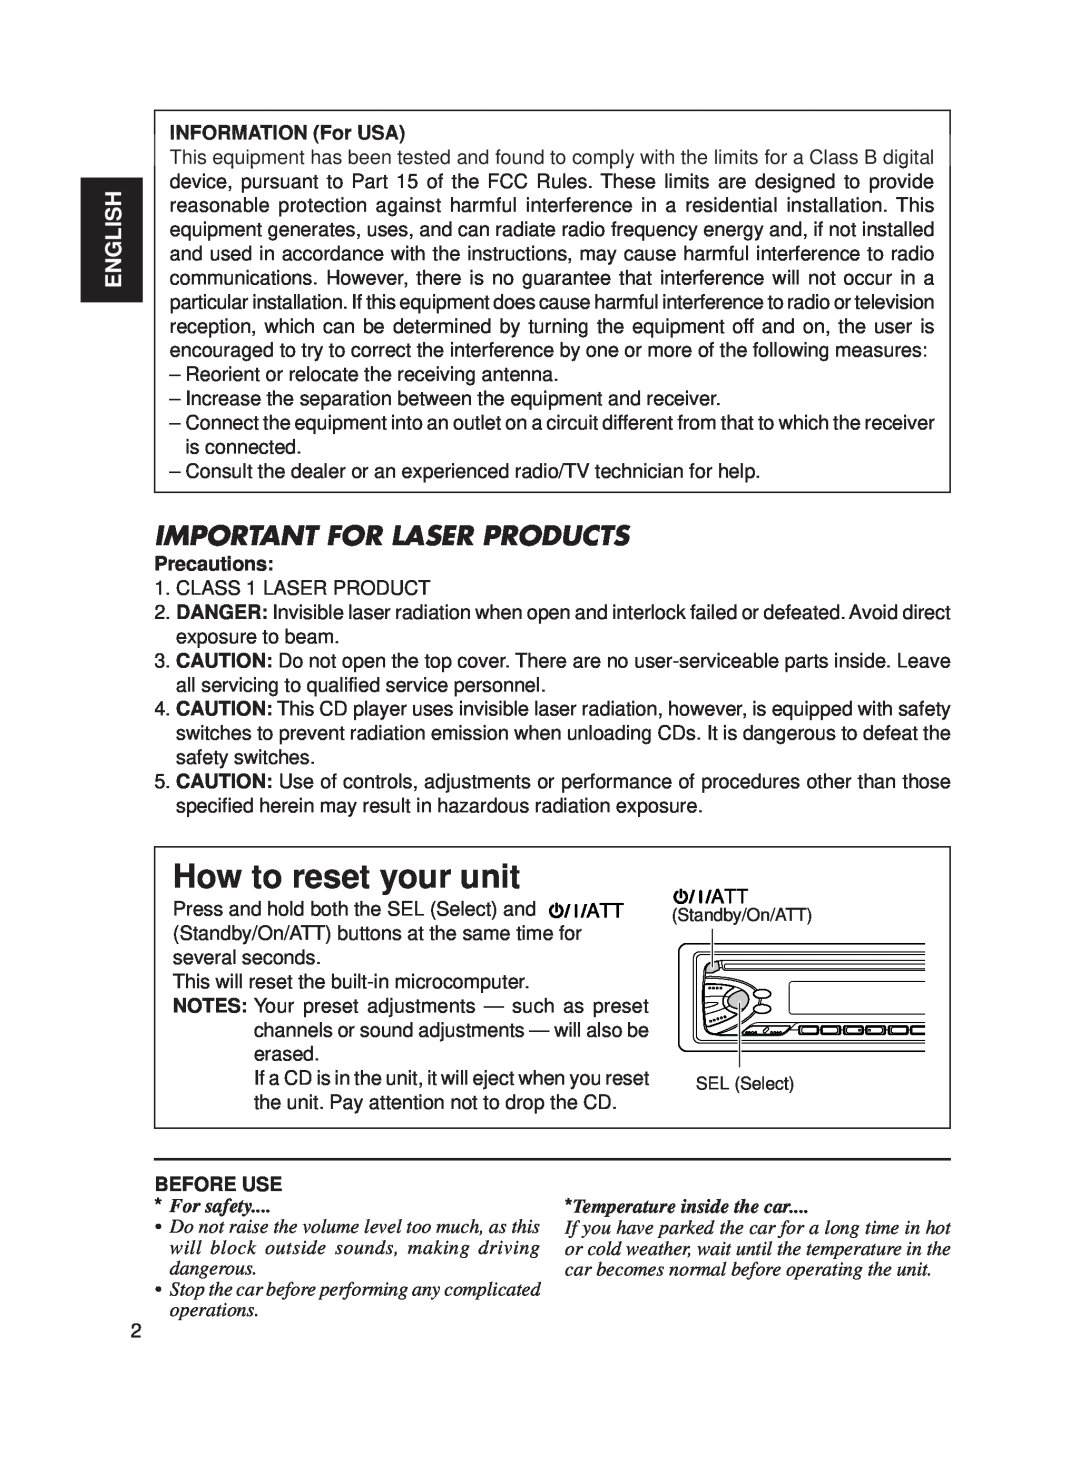 JVC KD-S620 How to reset your unit, Important For Laser Products, English, INFORMATION For USA, Precautions, Before Use 